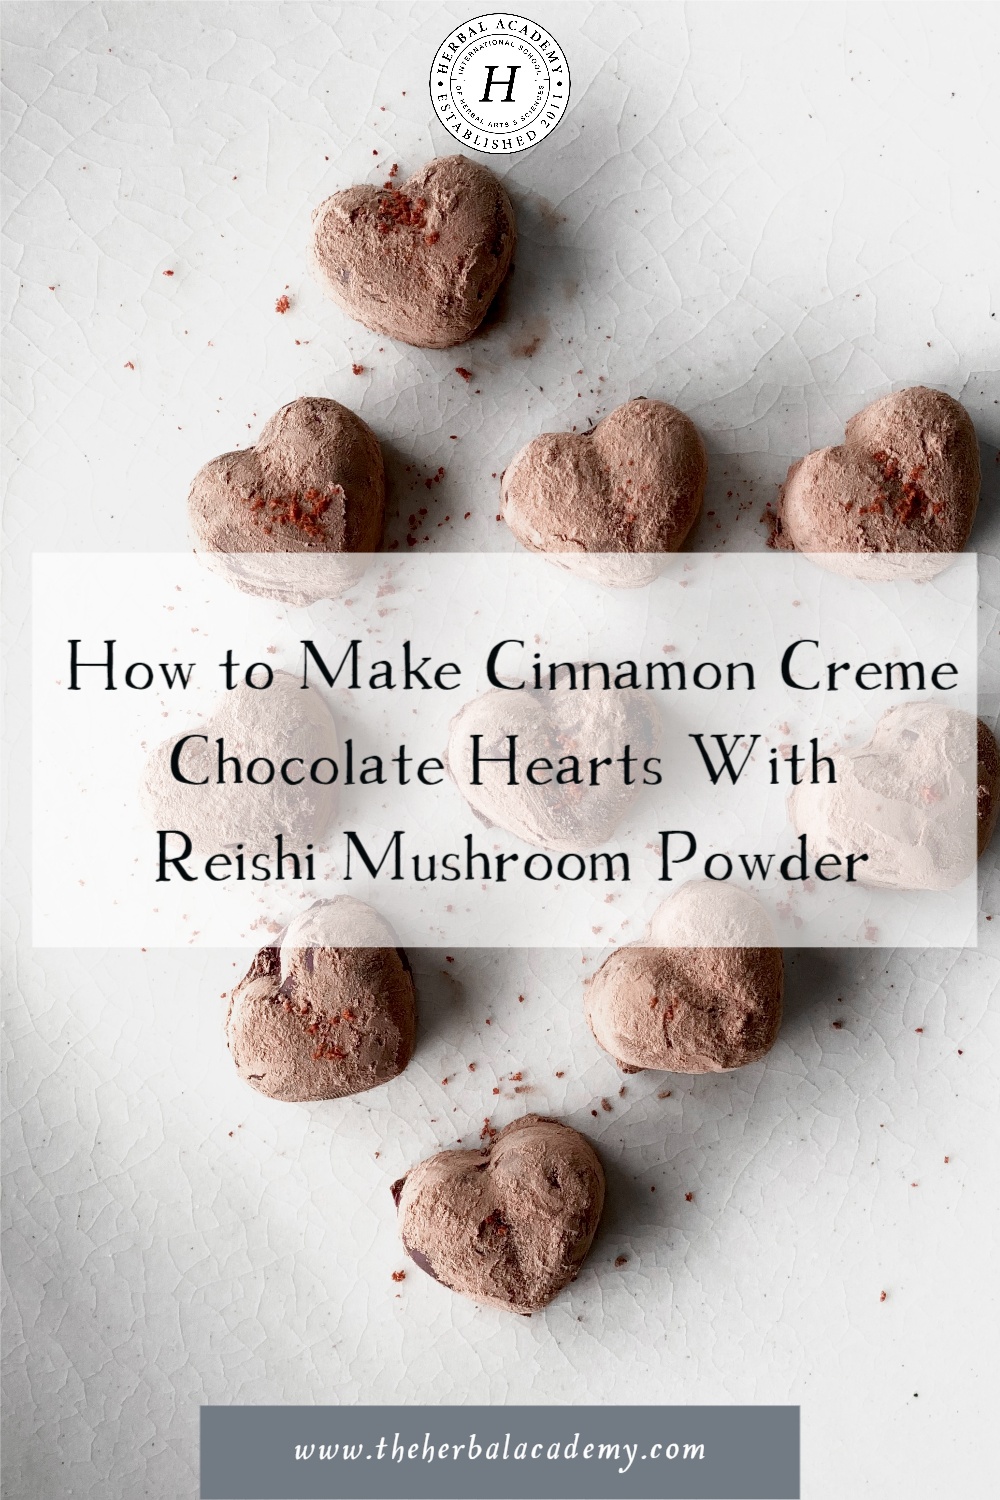 How to Make Cinnamon Crème Chocolate Hearts With Reishi Mushroom Powder | Herbal Academy | Make these cinnamon crème chocolate hearts if you are craving something sweet and nourishing for the body and emotional heart.